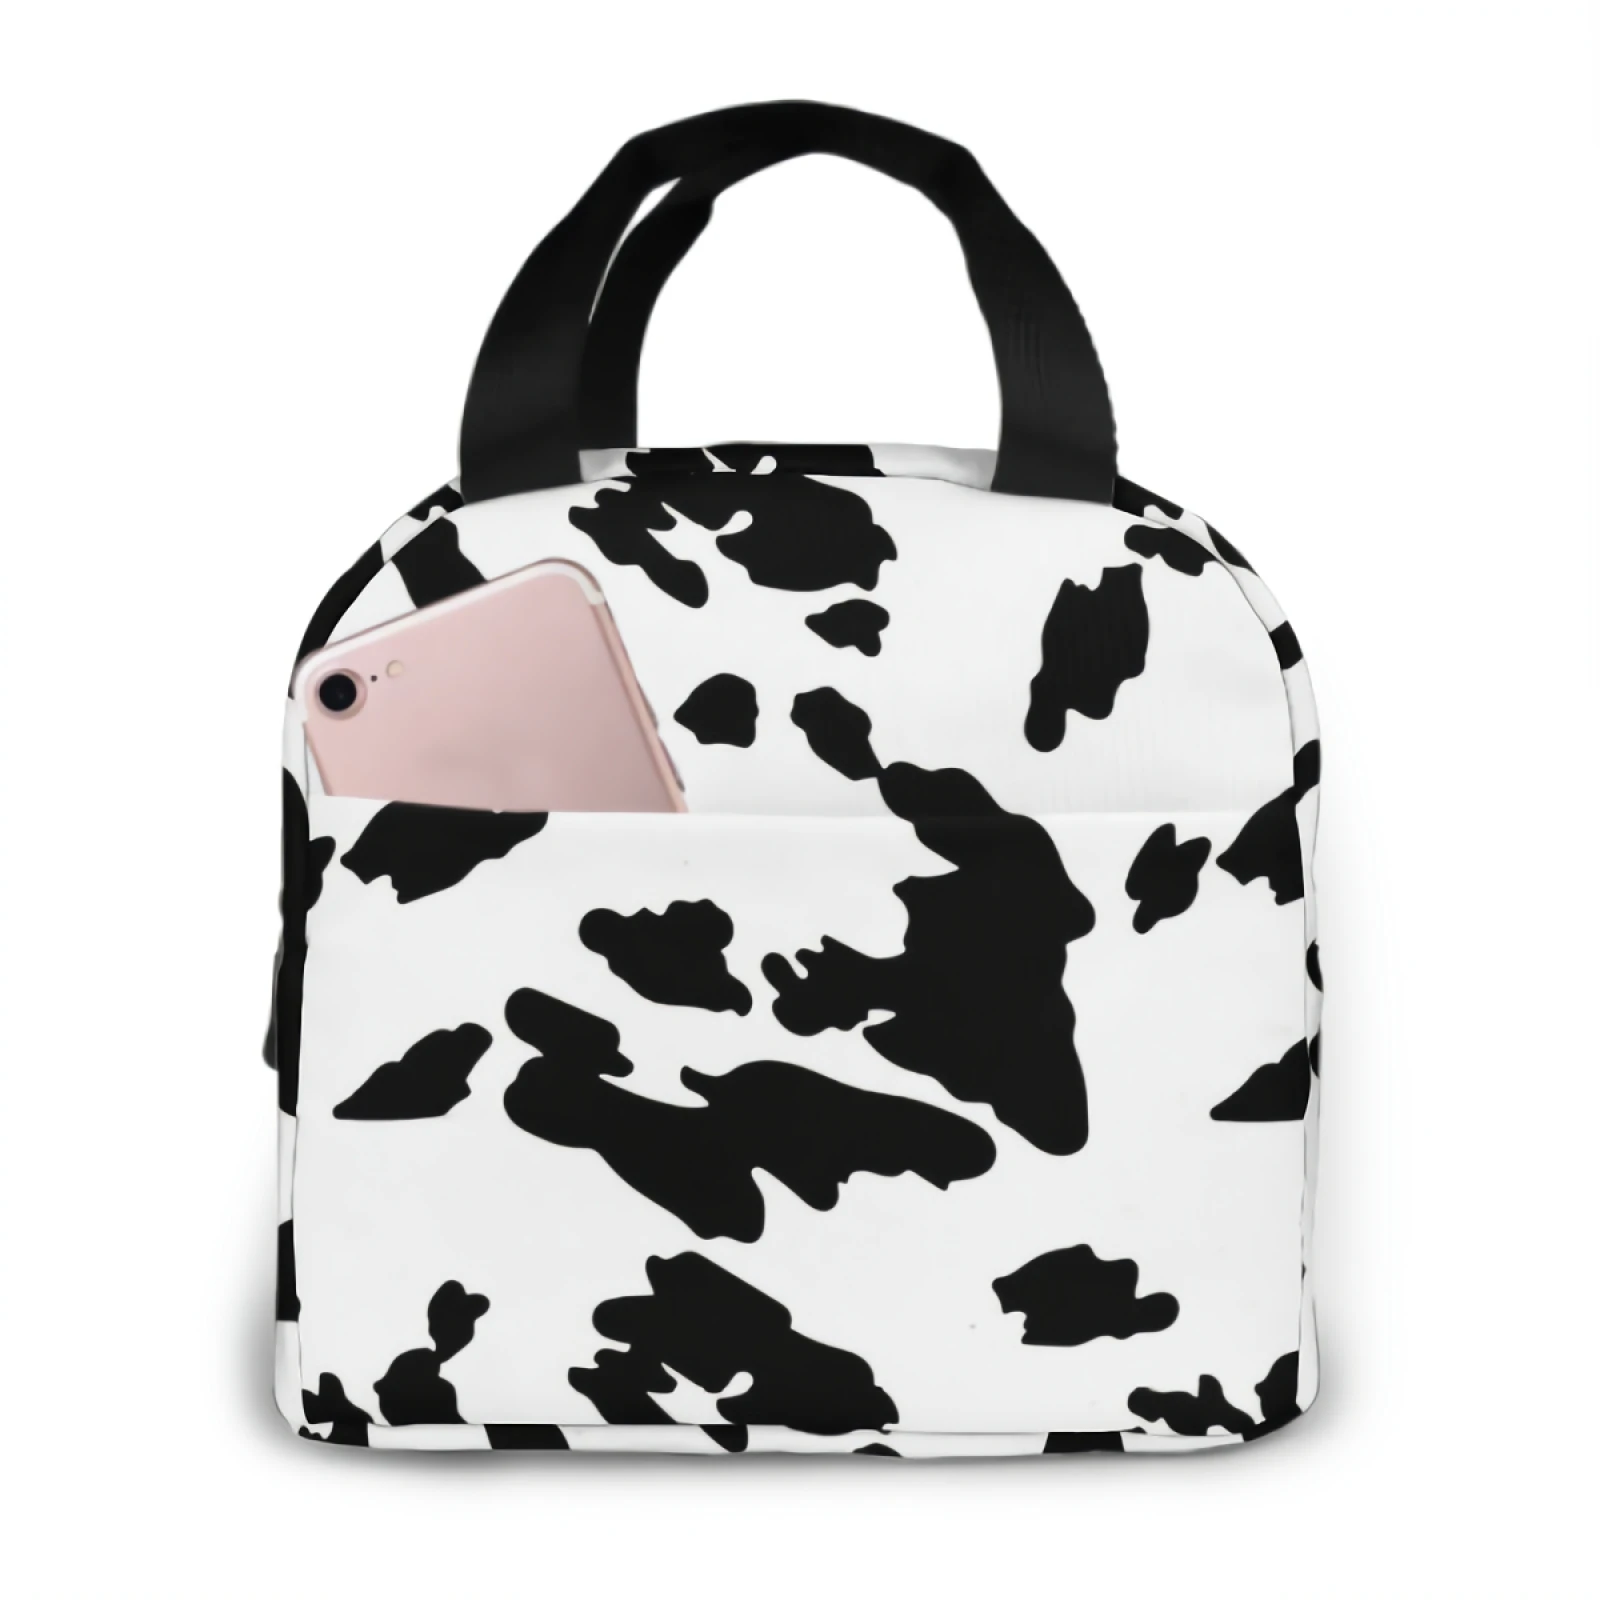 

Cow Skin Pattern Insulated Lunch Bag lunch box containers for Women Men Shopping Office School Picnic